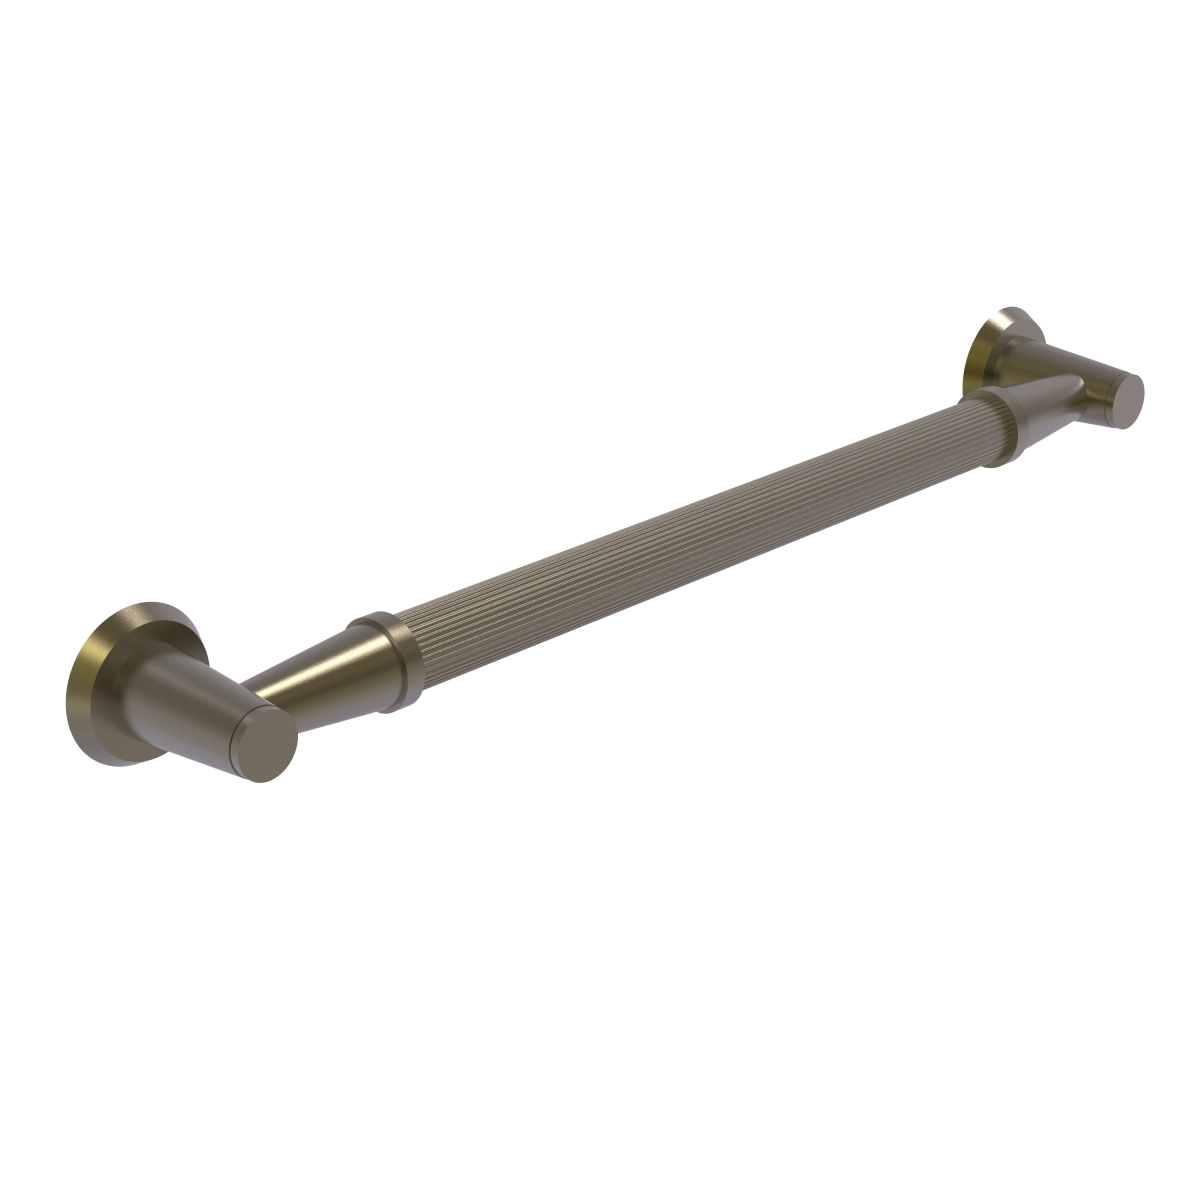 Picture of Allied Brass MD-GRR-24-ABR 24 in. Reeded Grab Bar, Antique Brass - 3.5 x 26 x 24 in.